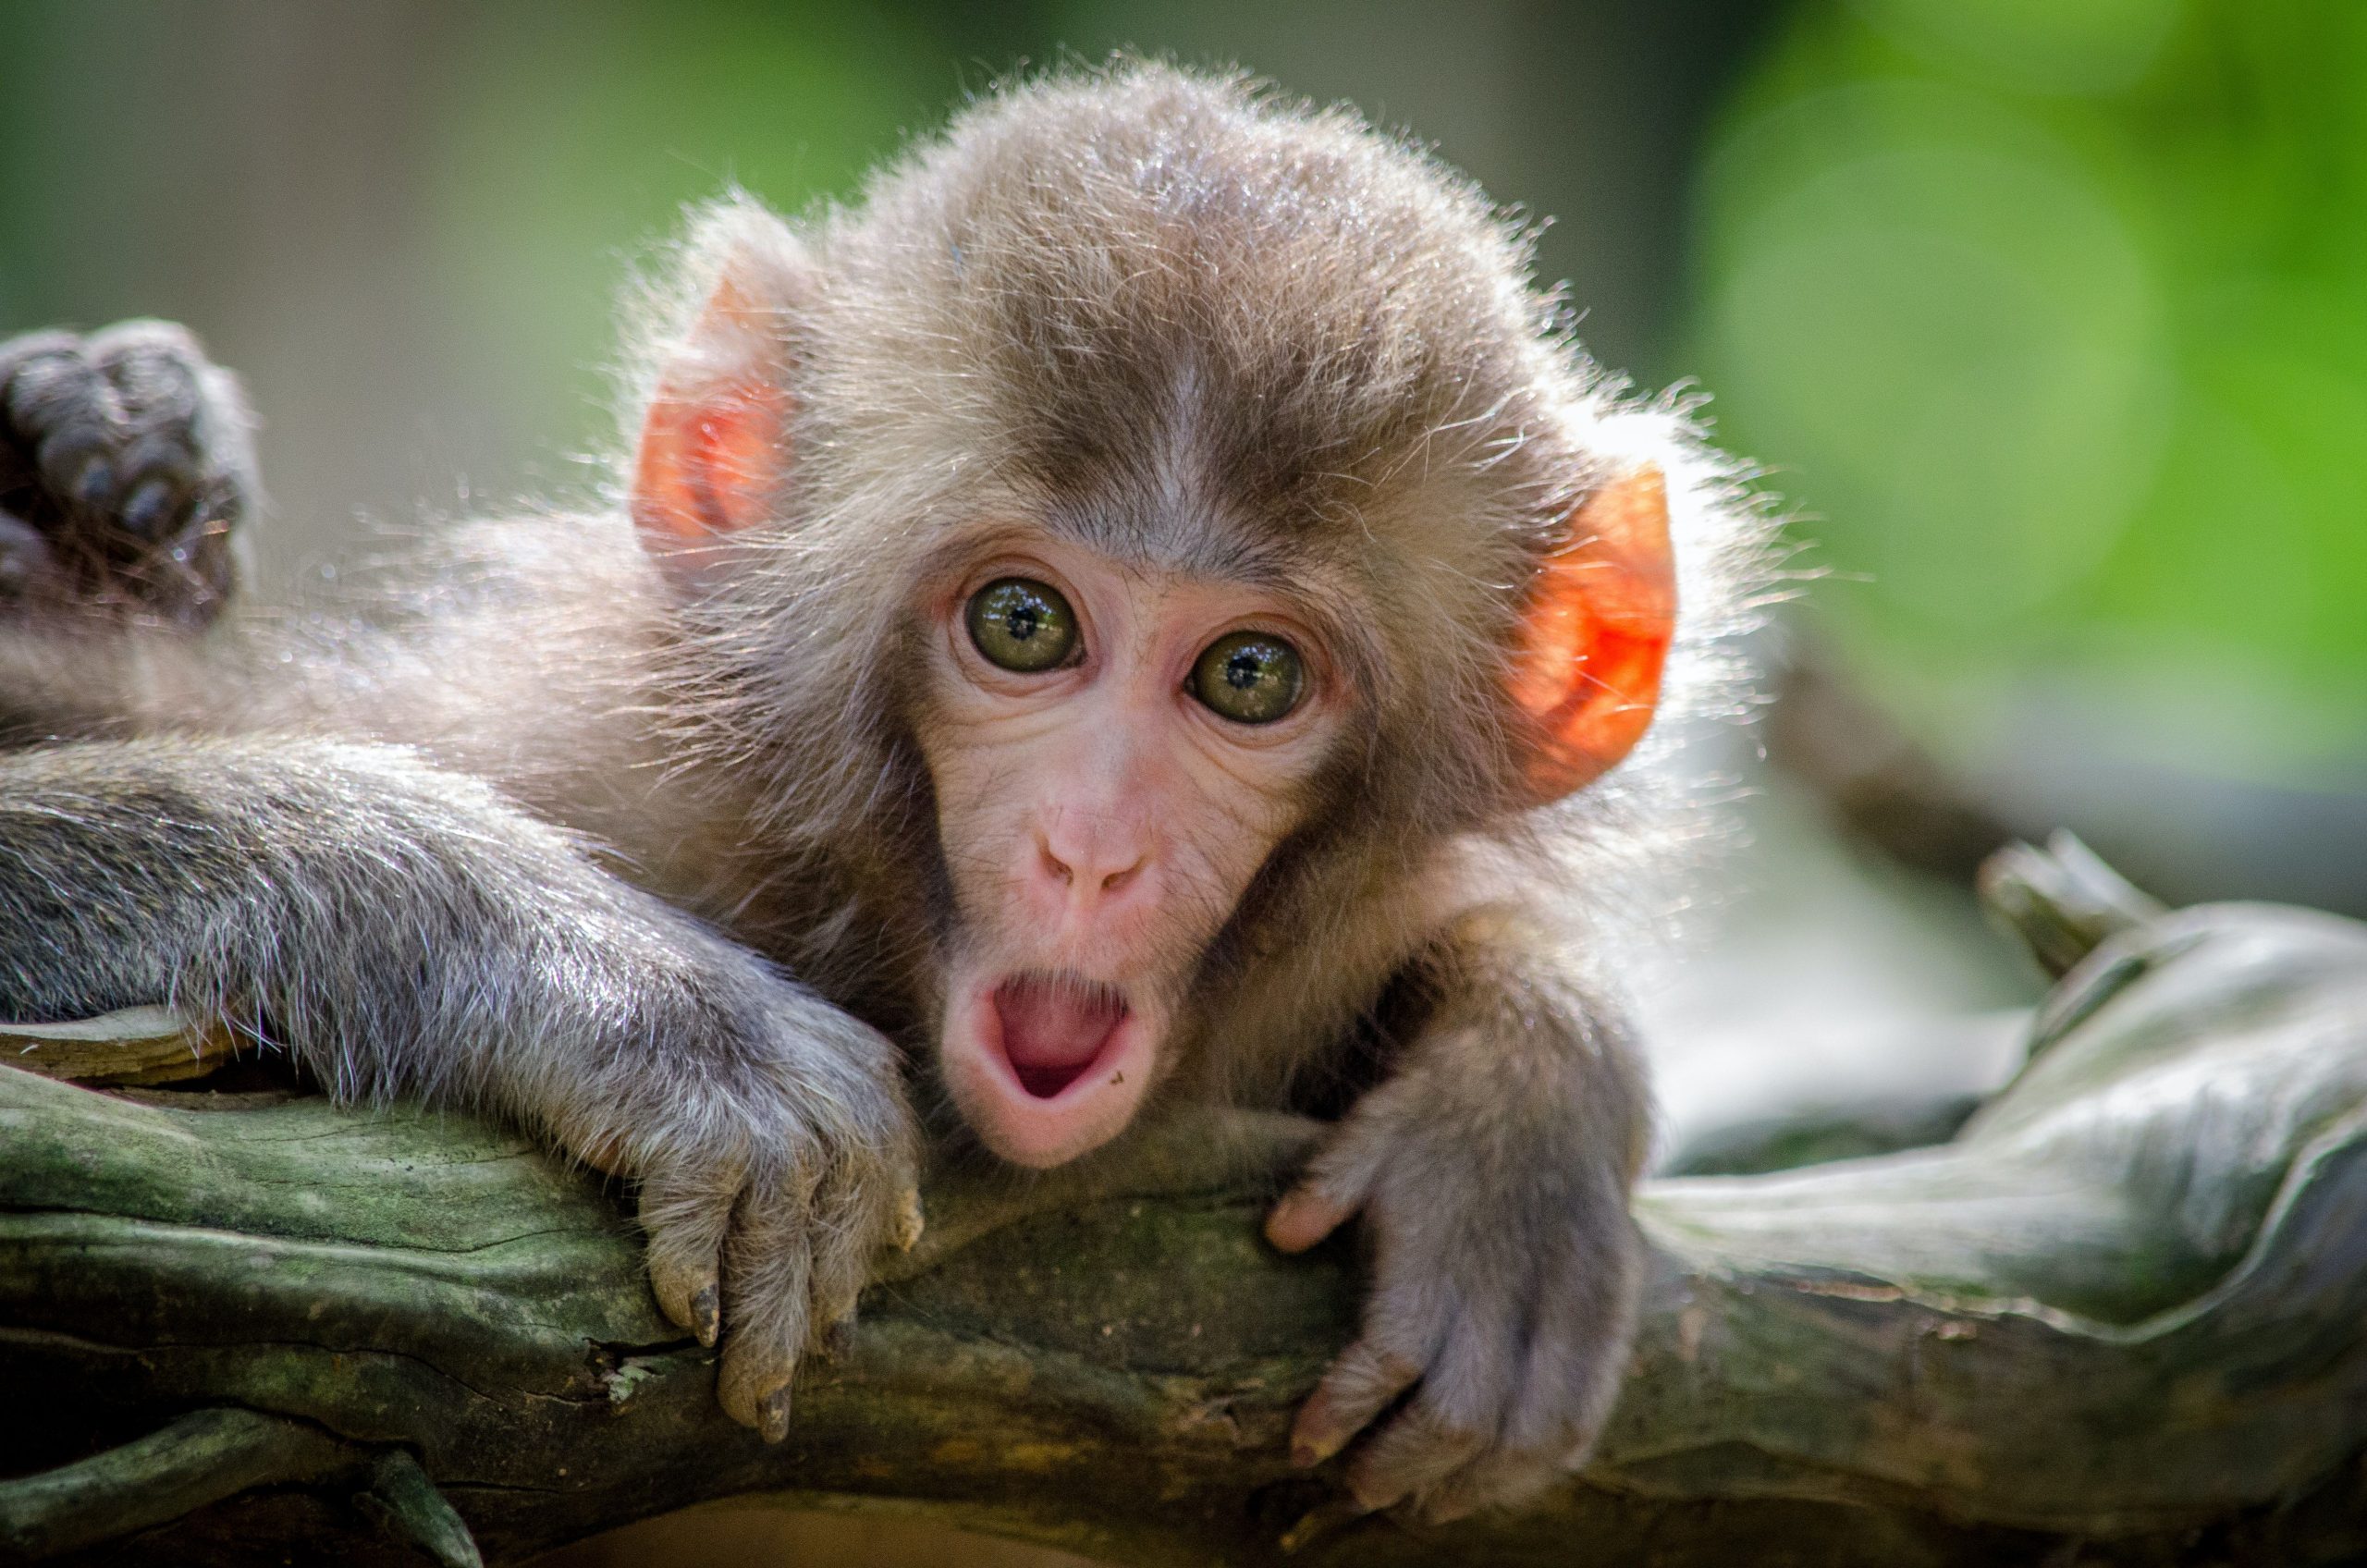 A tale of vengeance: Monkey duo captured after killing over 200 puppies